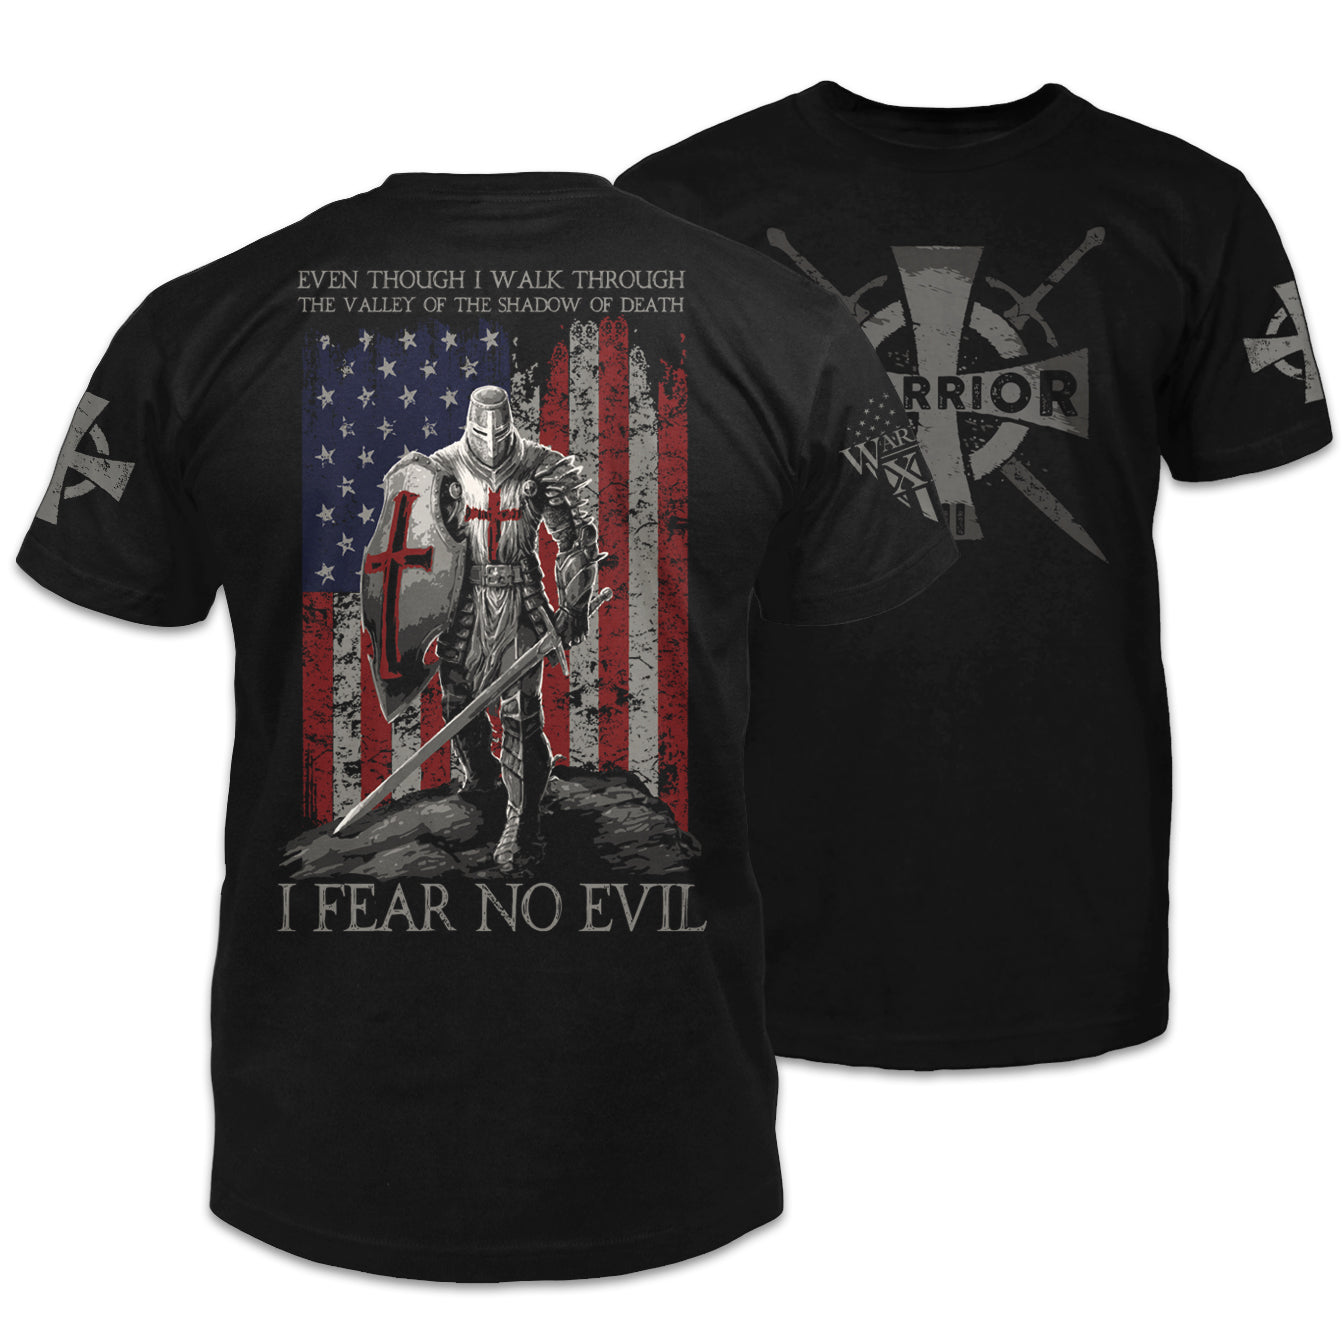 Front and back black t-shirt with the words "Even Though I Walk Through The Valley Of The Shadow Of Death, I FEAR NO EVIL -Psalm 23:4" with a crusader printed on the shirt.